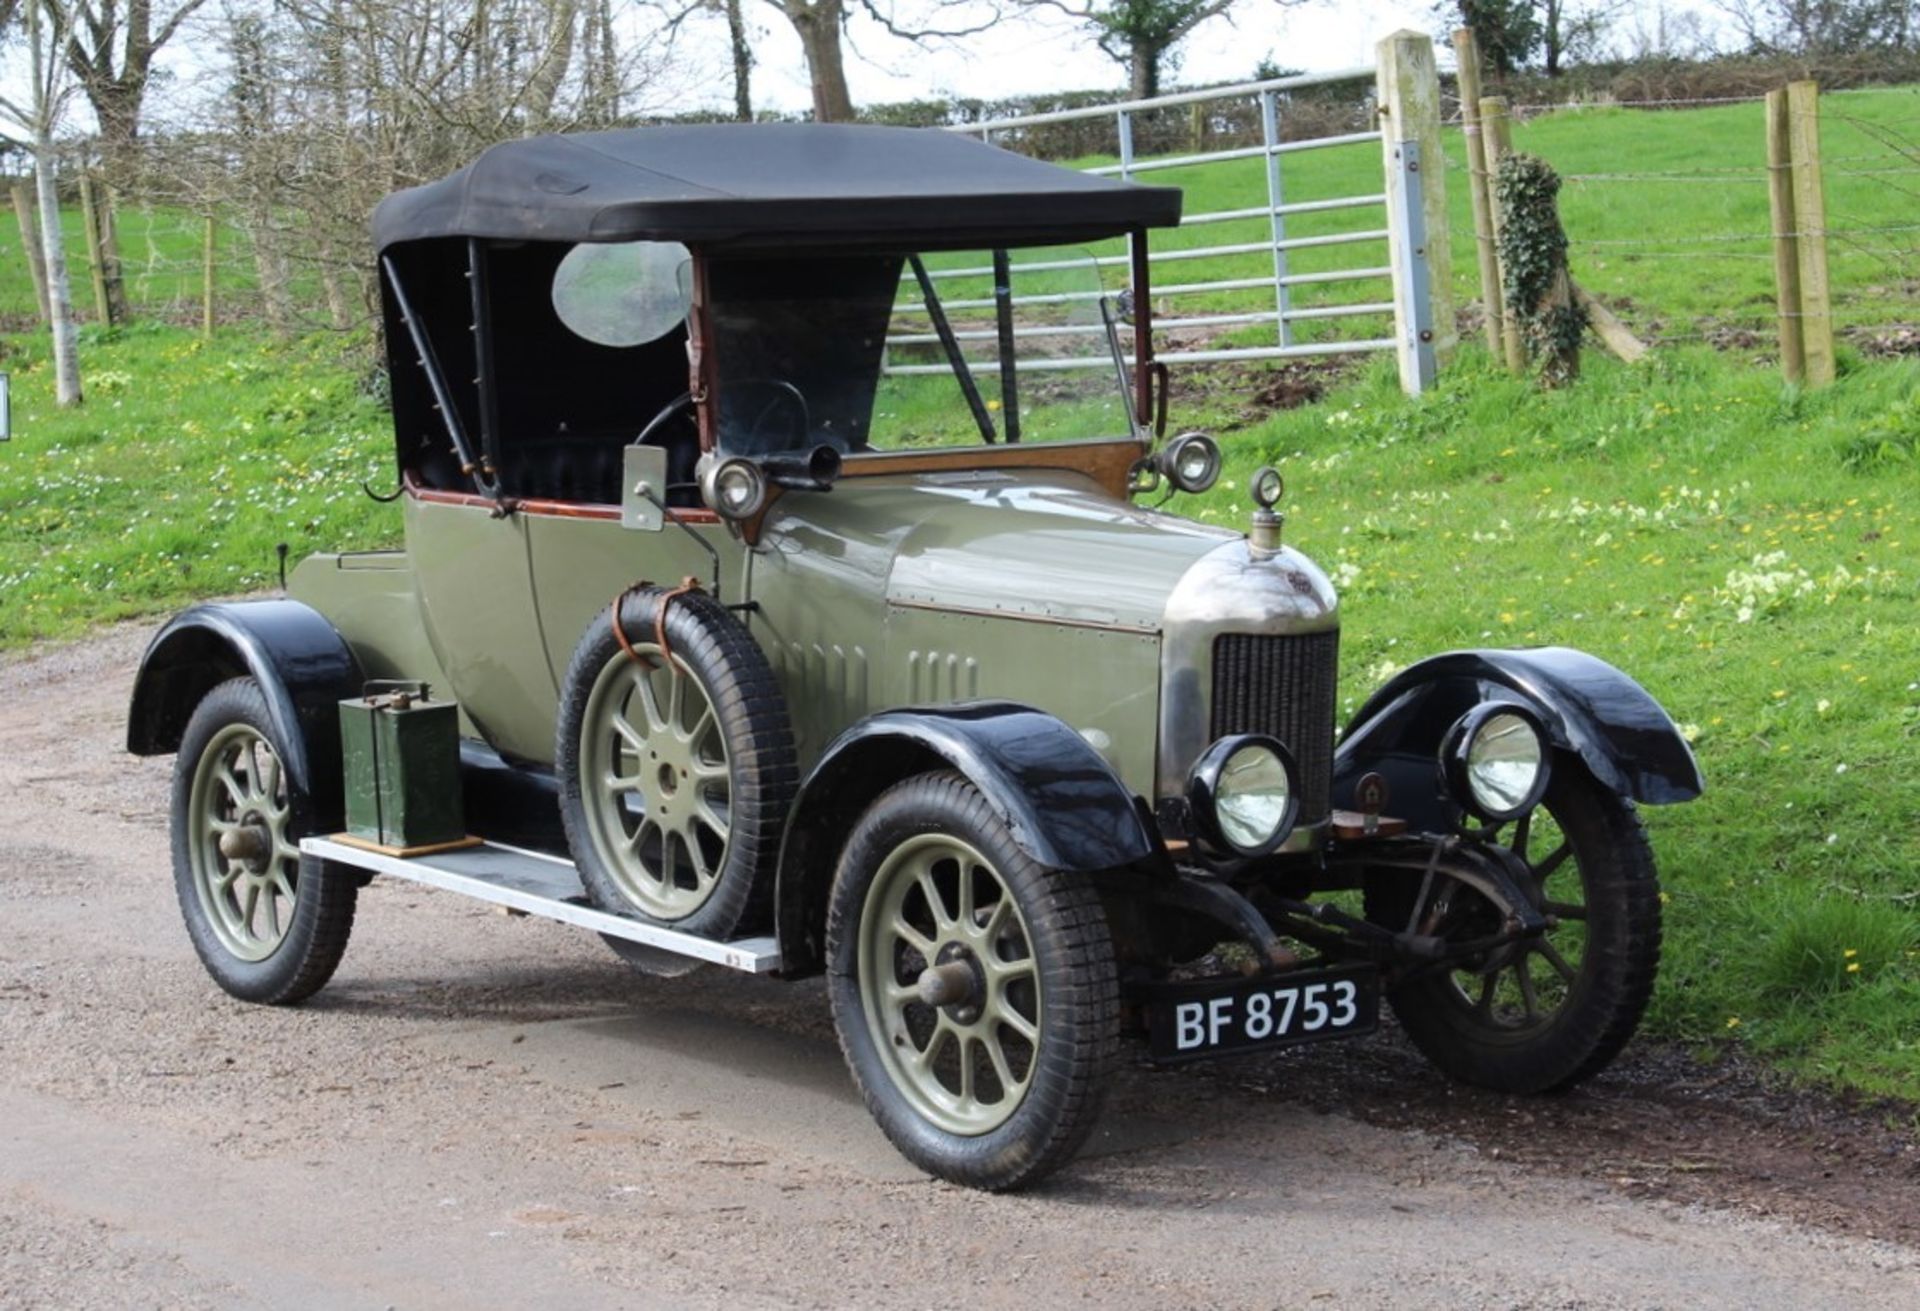 1921 MORRIS OXFORD ‘BULLNOSE’ DOCTOR'S COUPE Registration Number: BF 8753 Chassis Number: TBA - Image 3 of 19